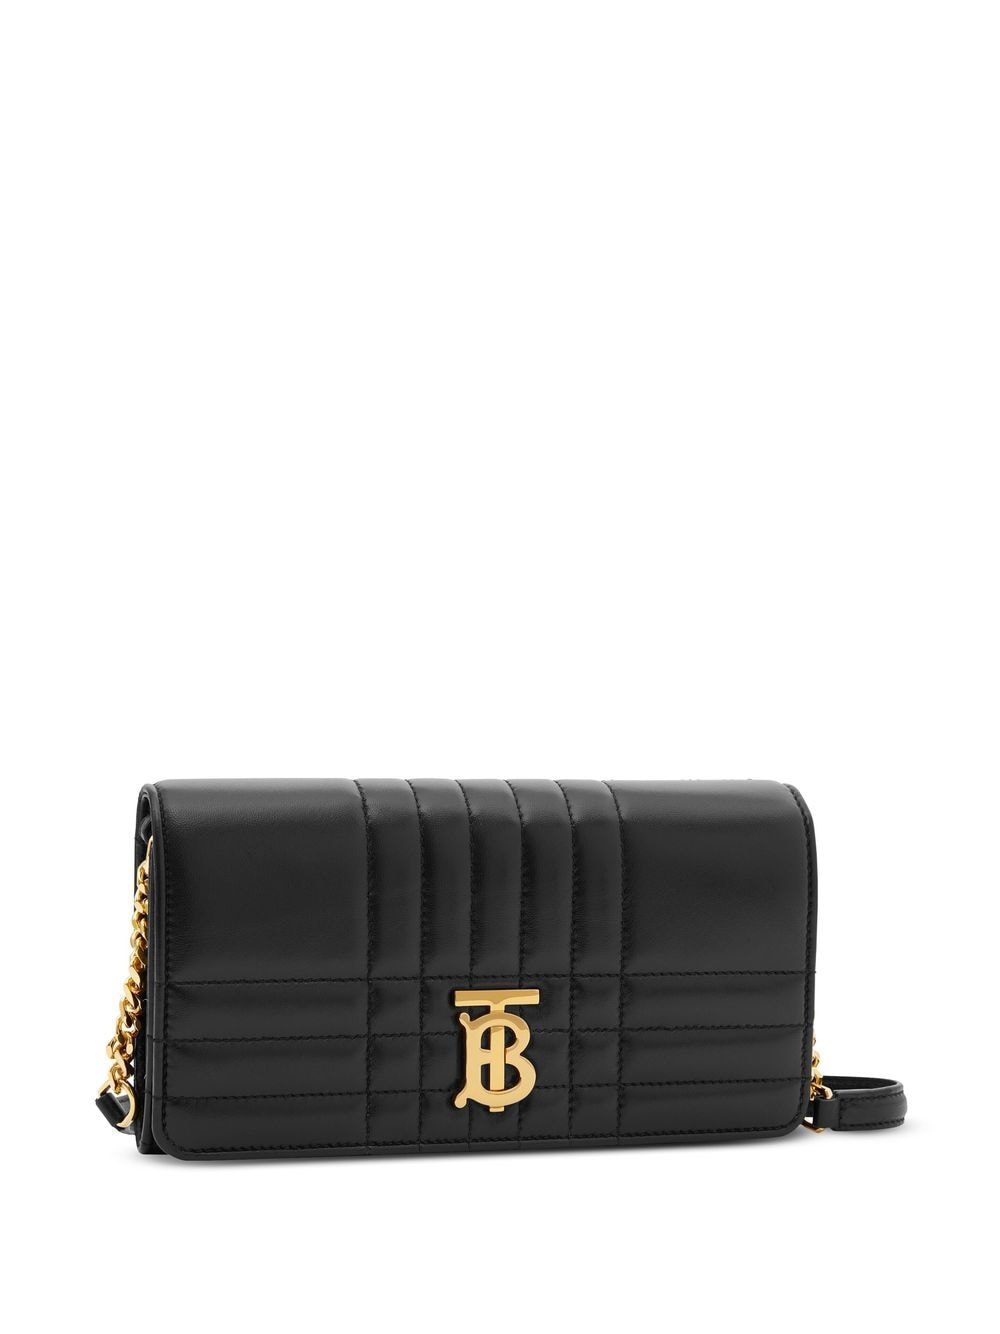 BLACK BURBERRY LOLA POUCH IN LEATHER (8062338)